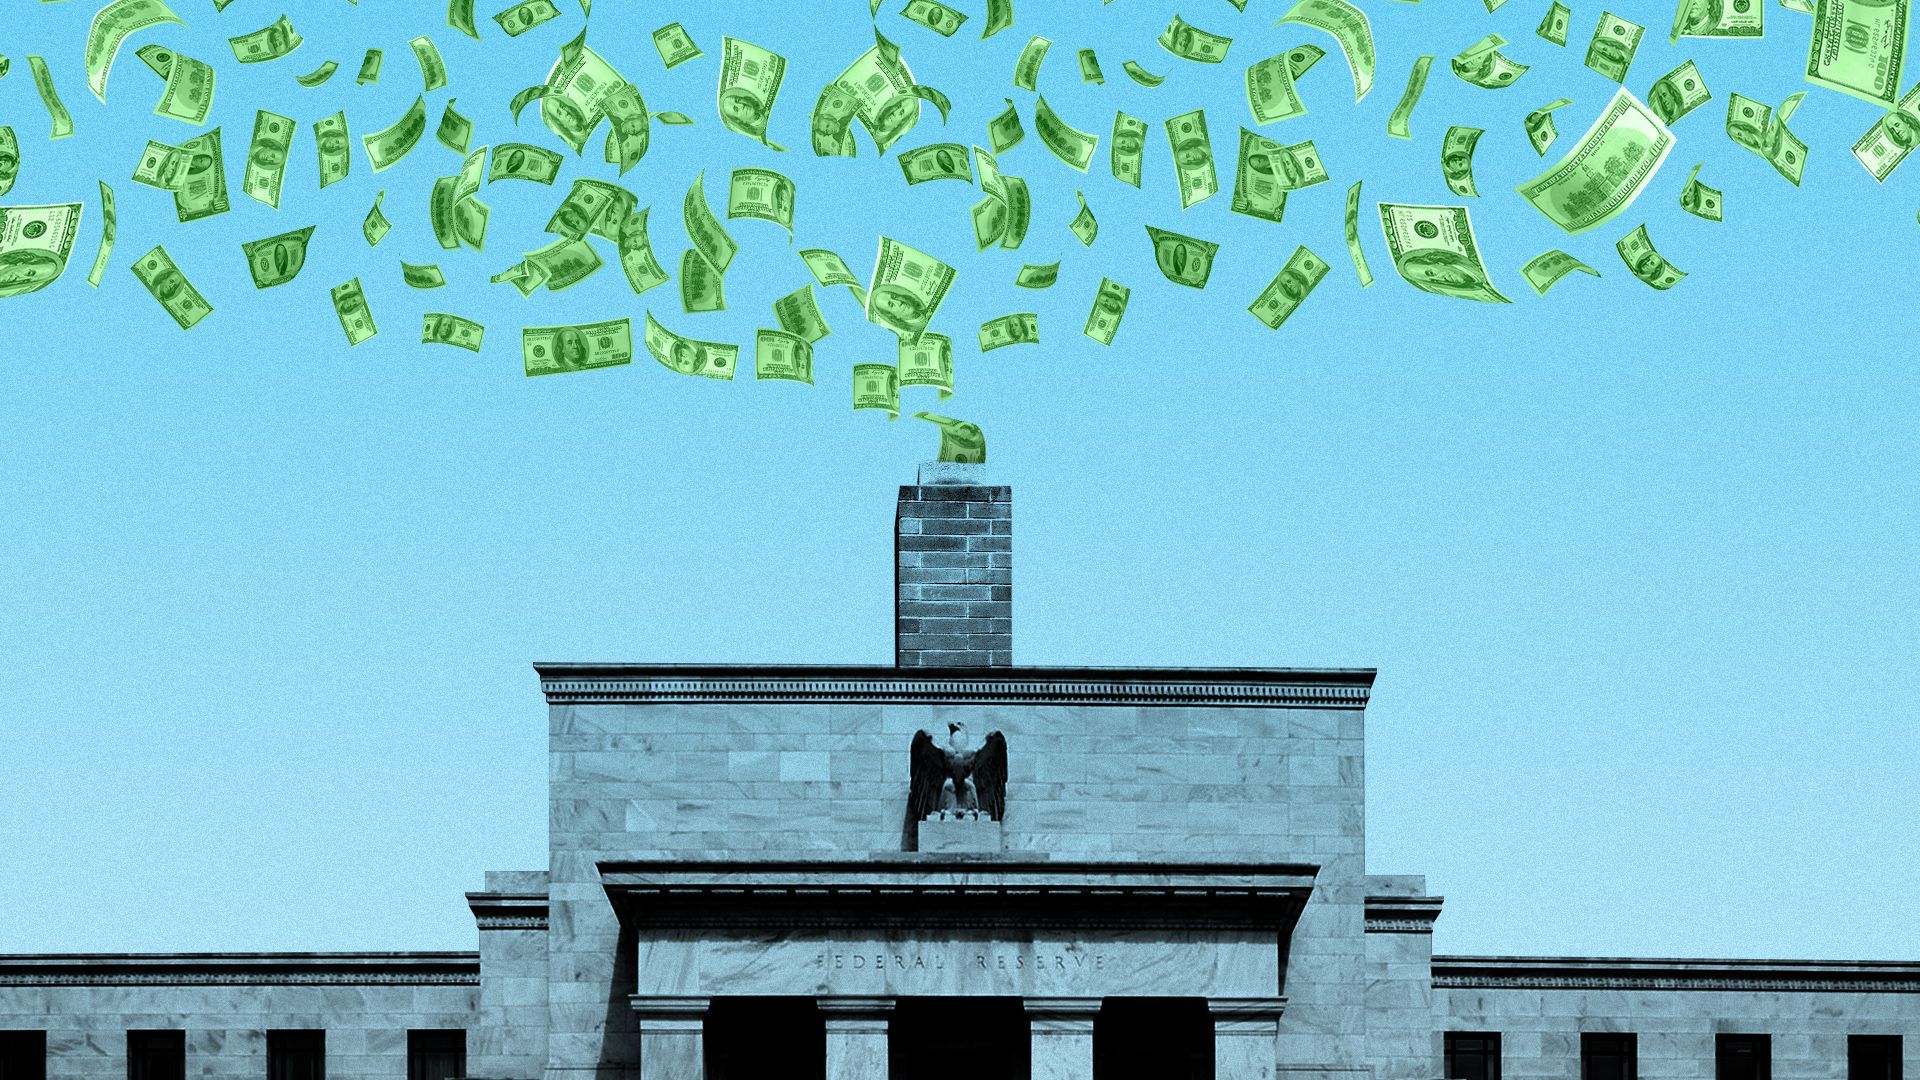 Illustration of the Fed with a chimney and tons of money coming out of the chimney.  